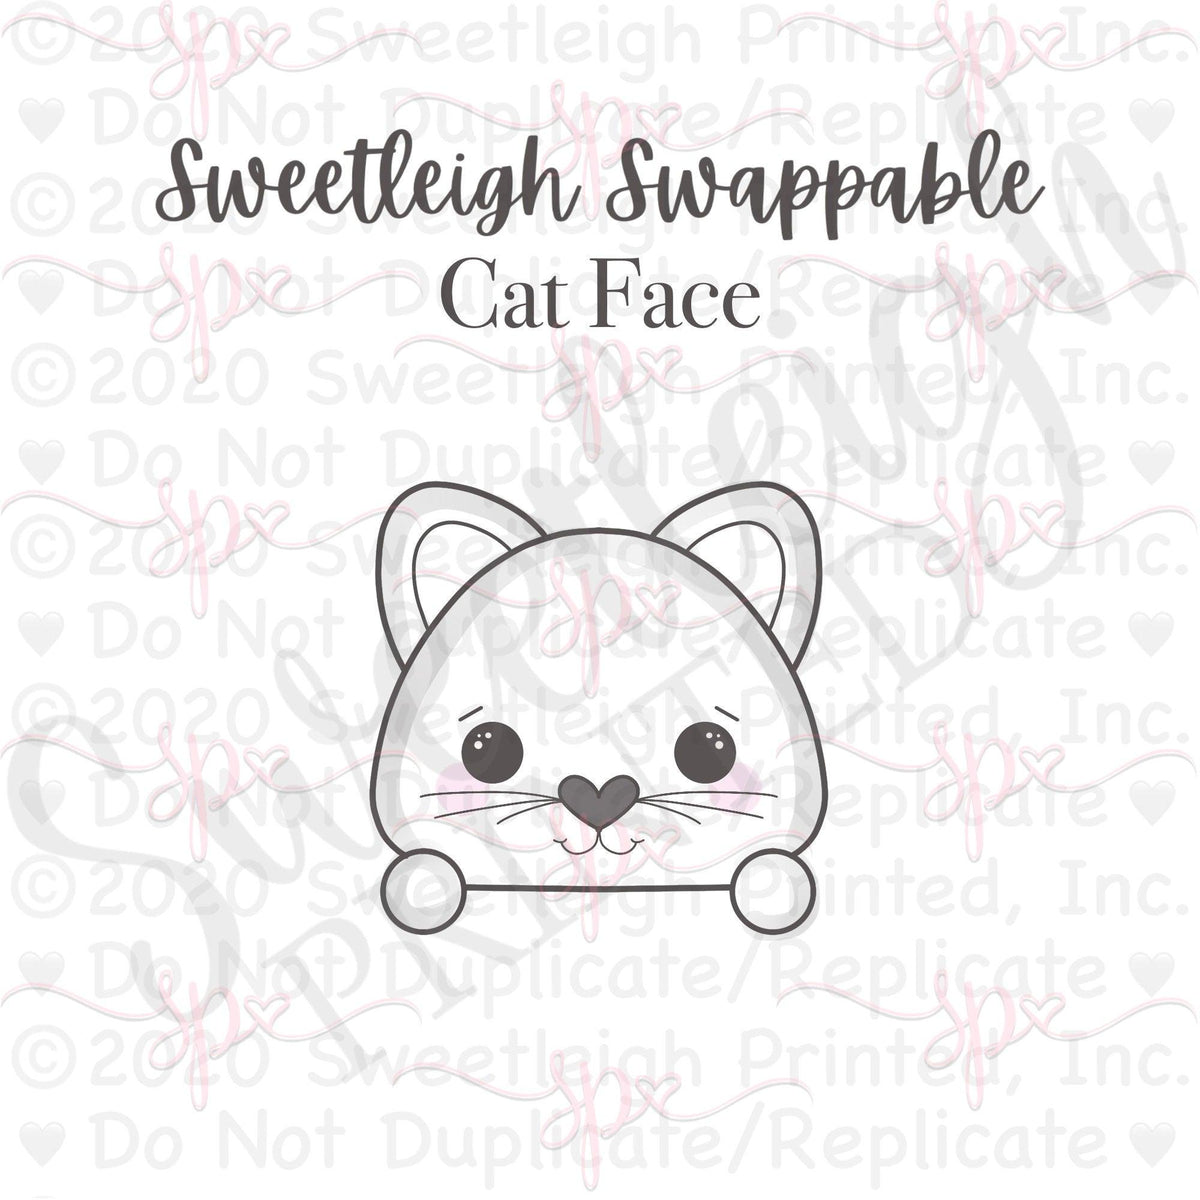 Sweetleigh Swappable Cat Face Cookie Cutter - Sweetleigh 